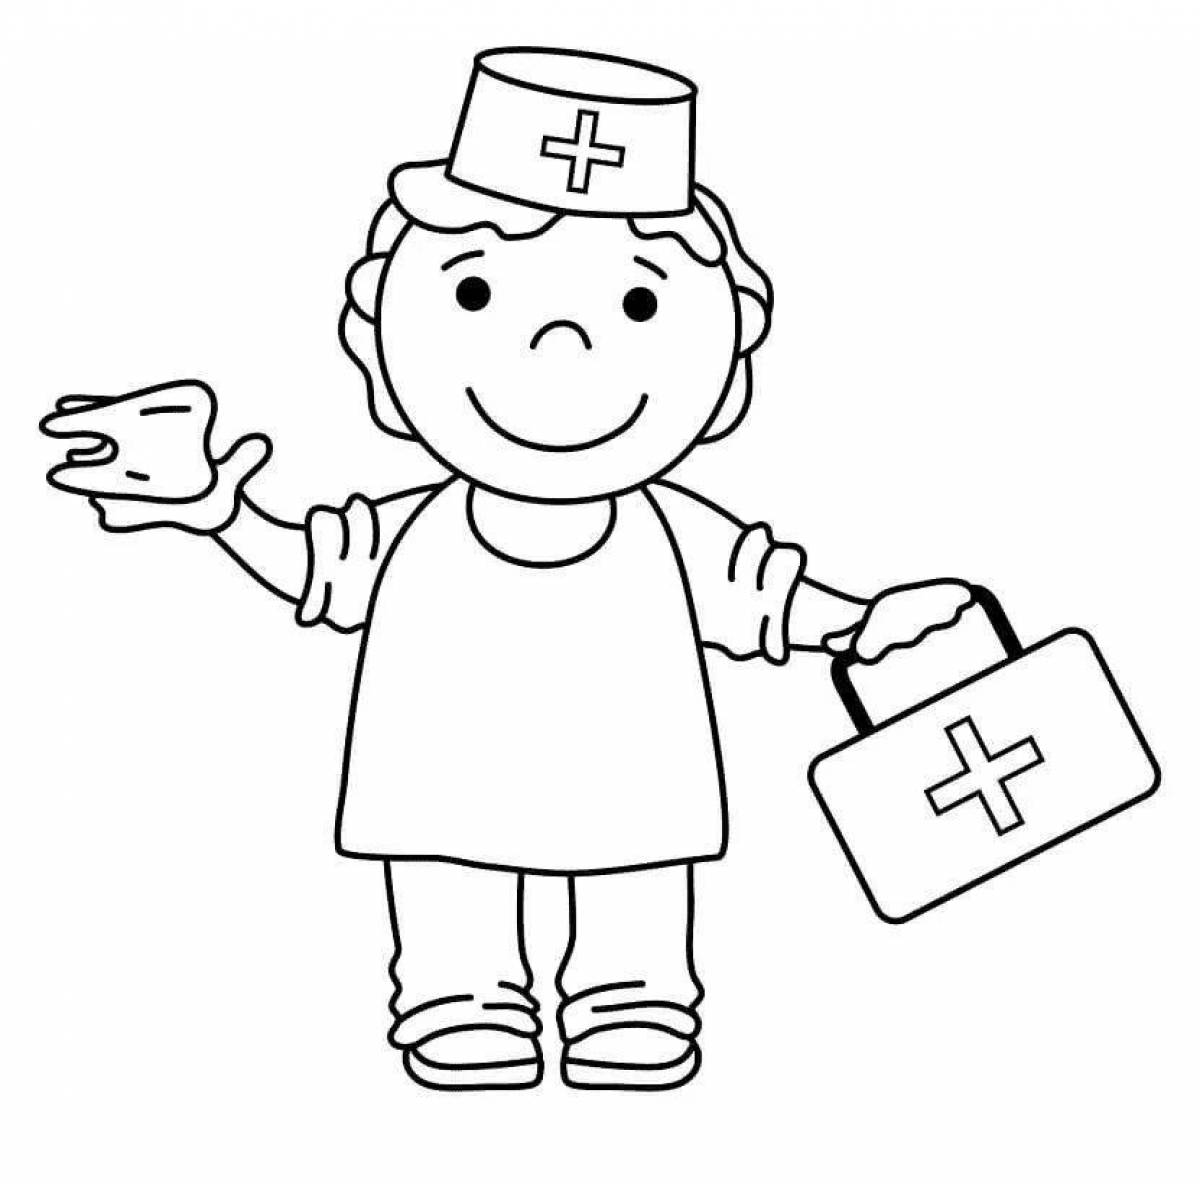 Coloring page adorable doctor figurine